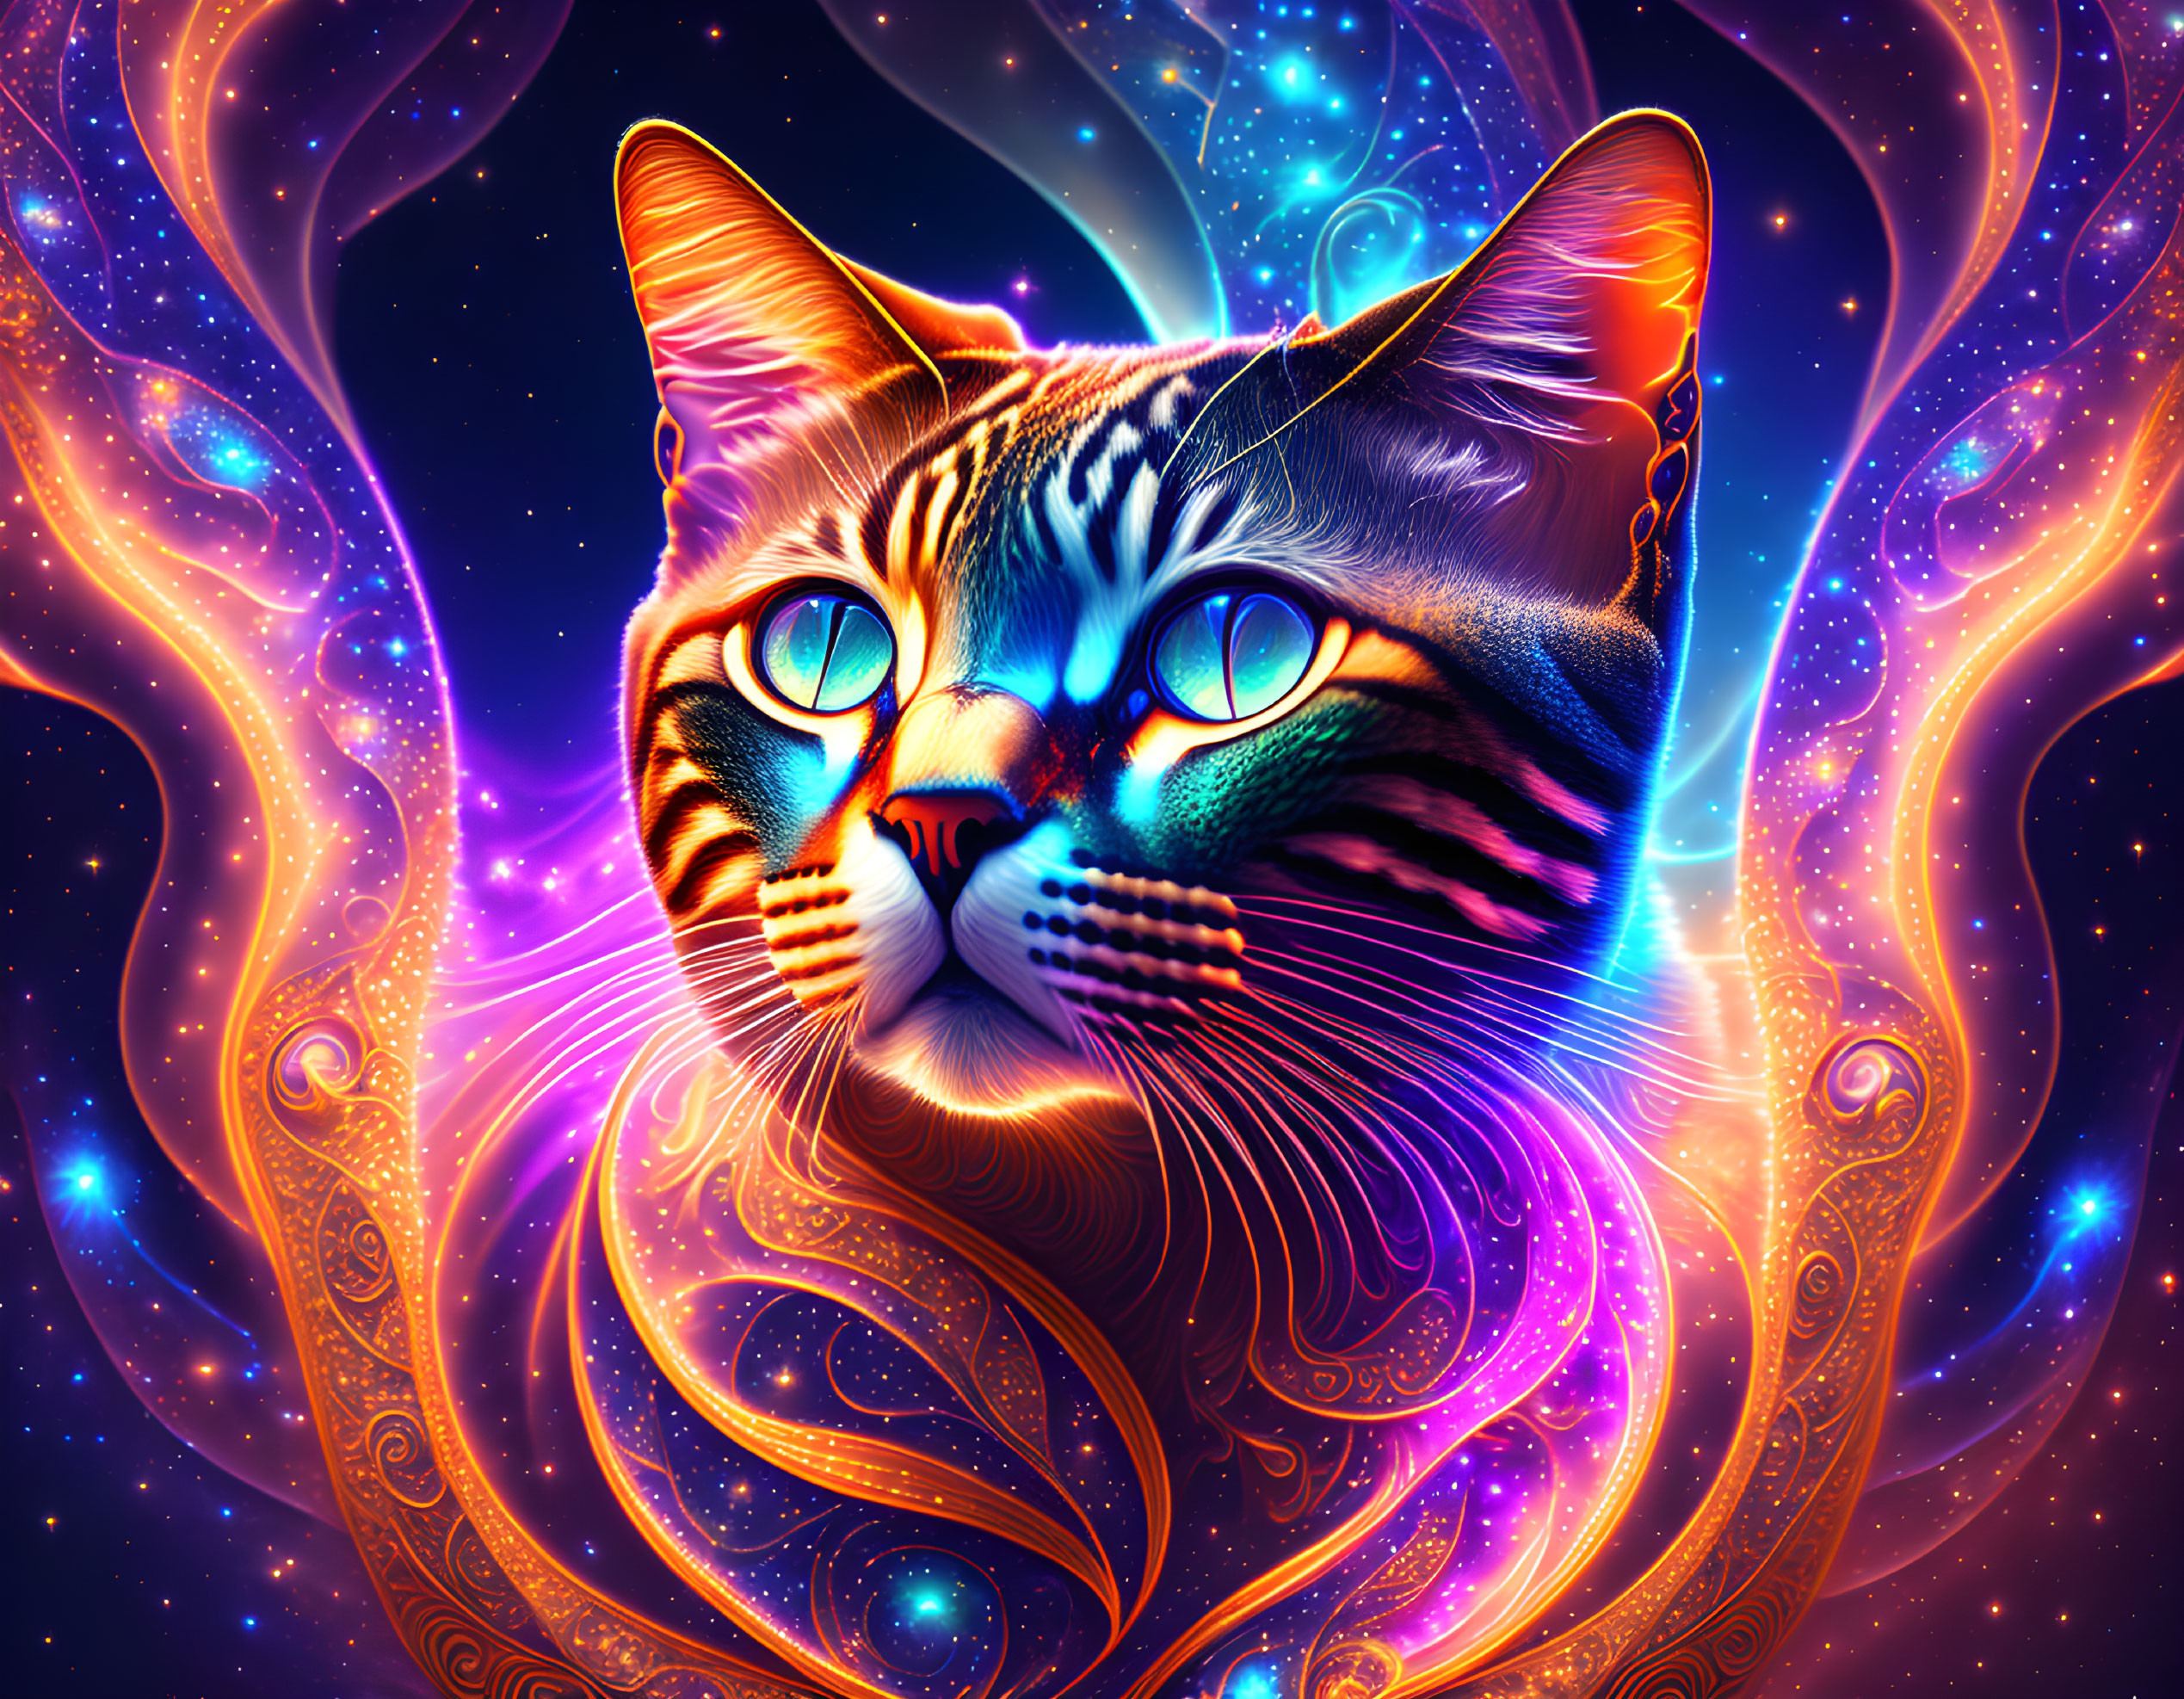 Colorful cosmic cat with blue eyes in neon patterns on dark space background